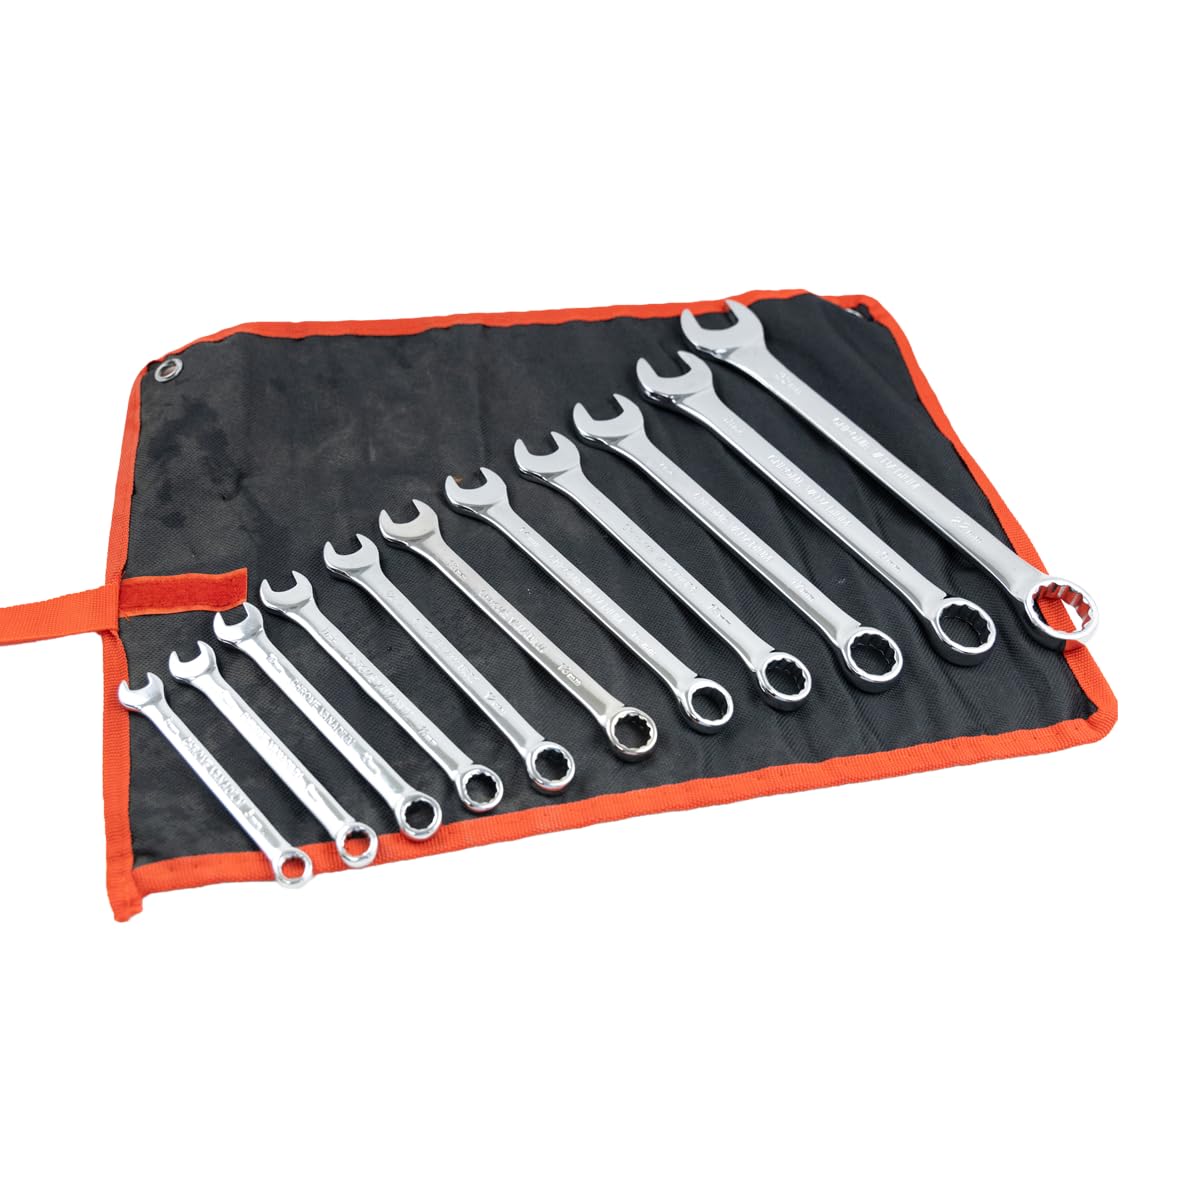 AEGON 12Pcs Combination Spanner Wrench Set with Cloth Organiser, 6mm to 22mm, Chrome Vanadium Steel For DIY, Household, Automobile Repairs